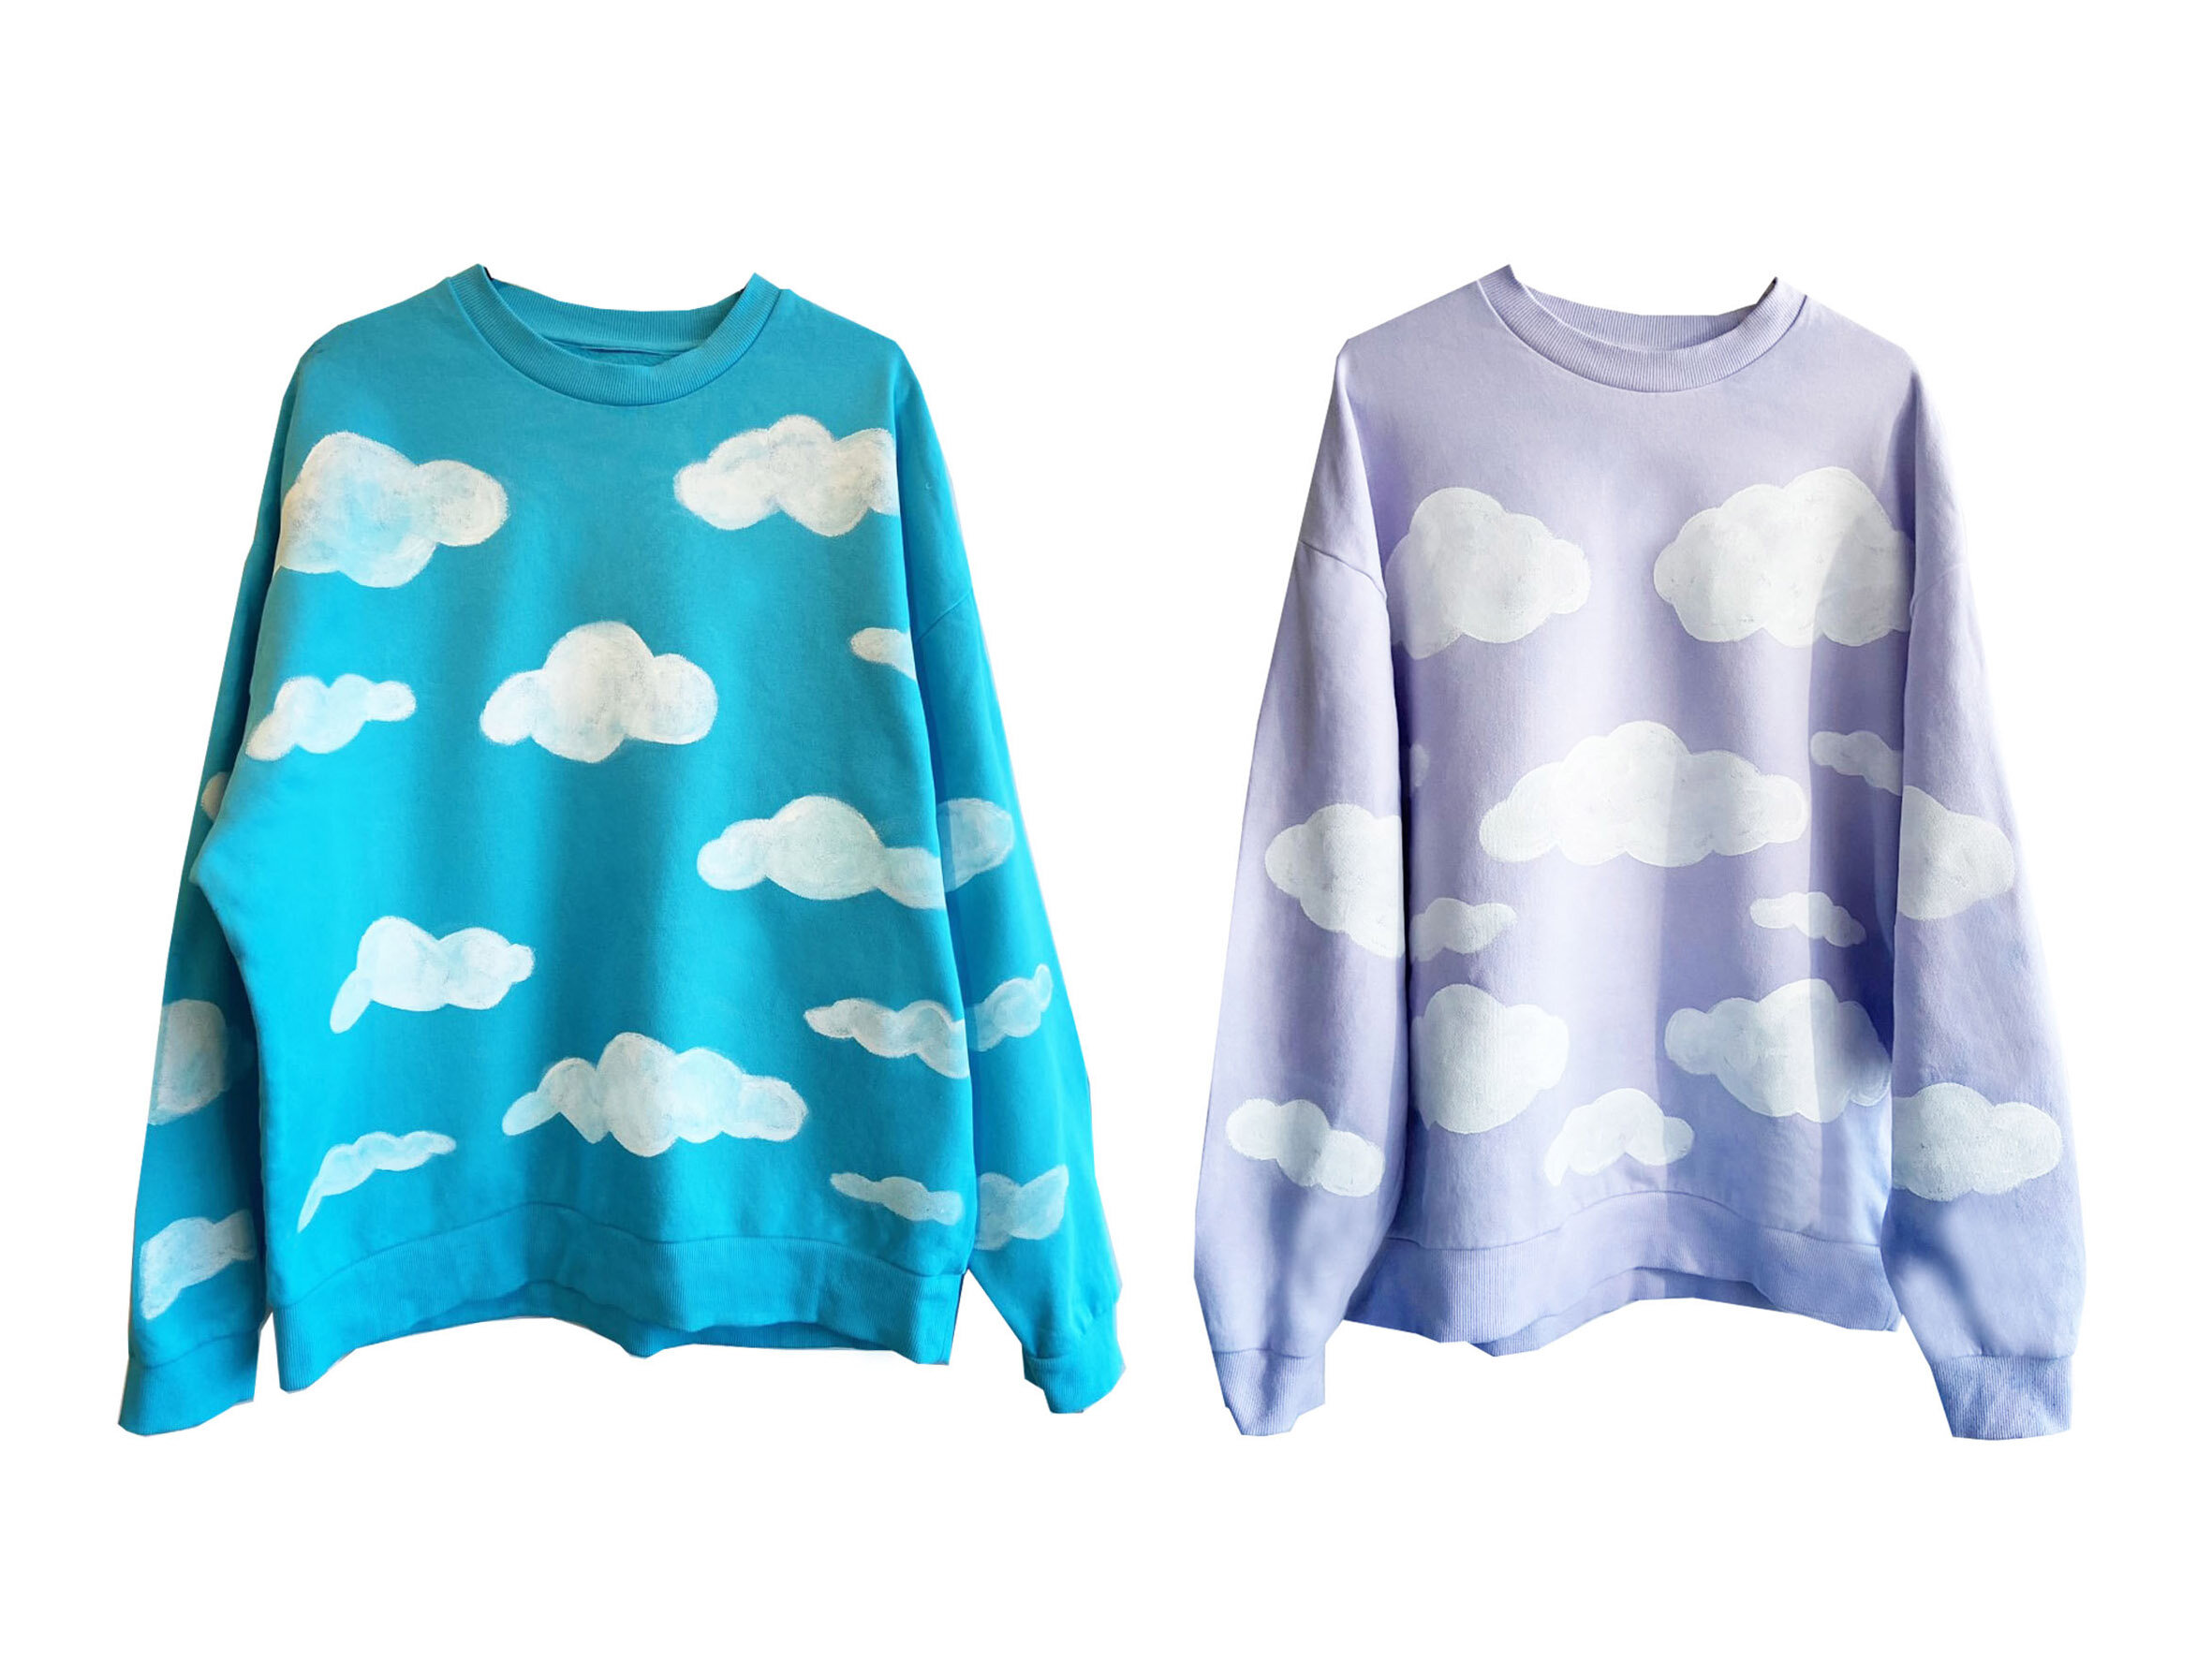 Blue Sky and cloud hand painted tshirt - Quillattire